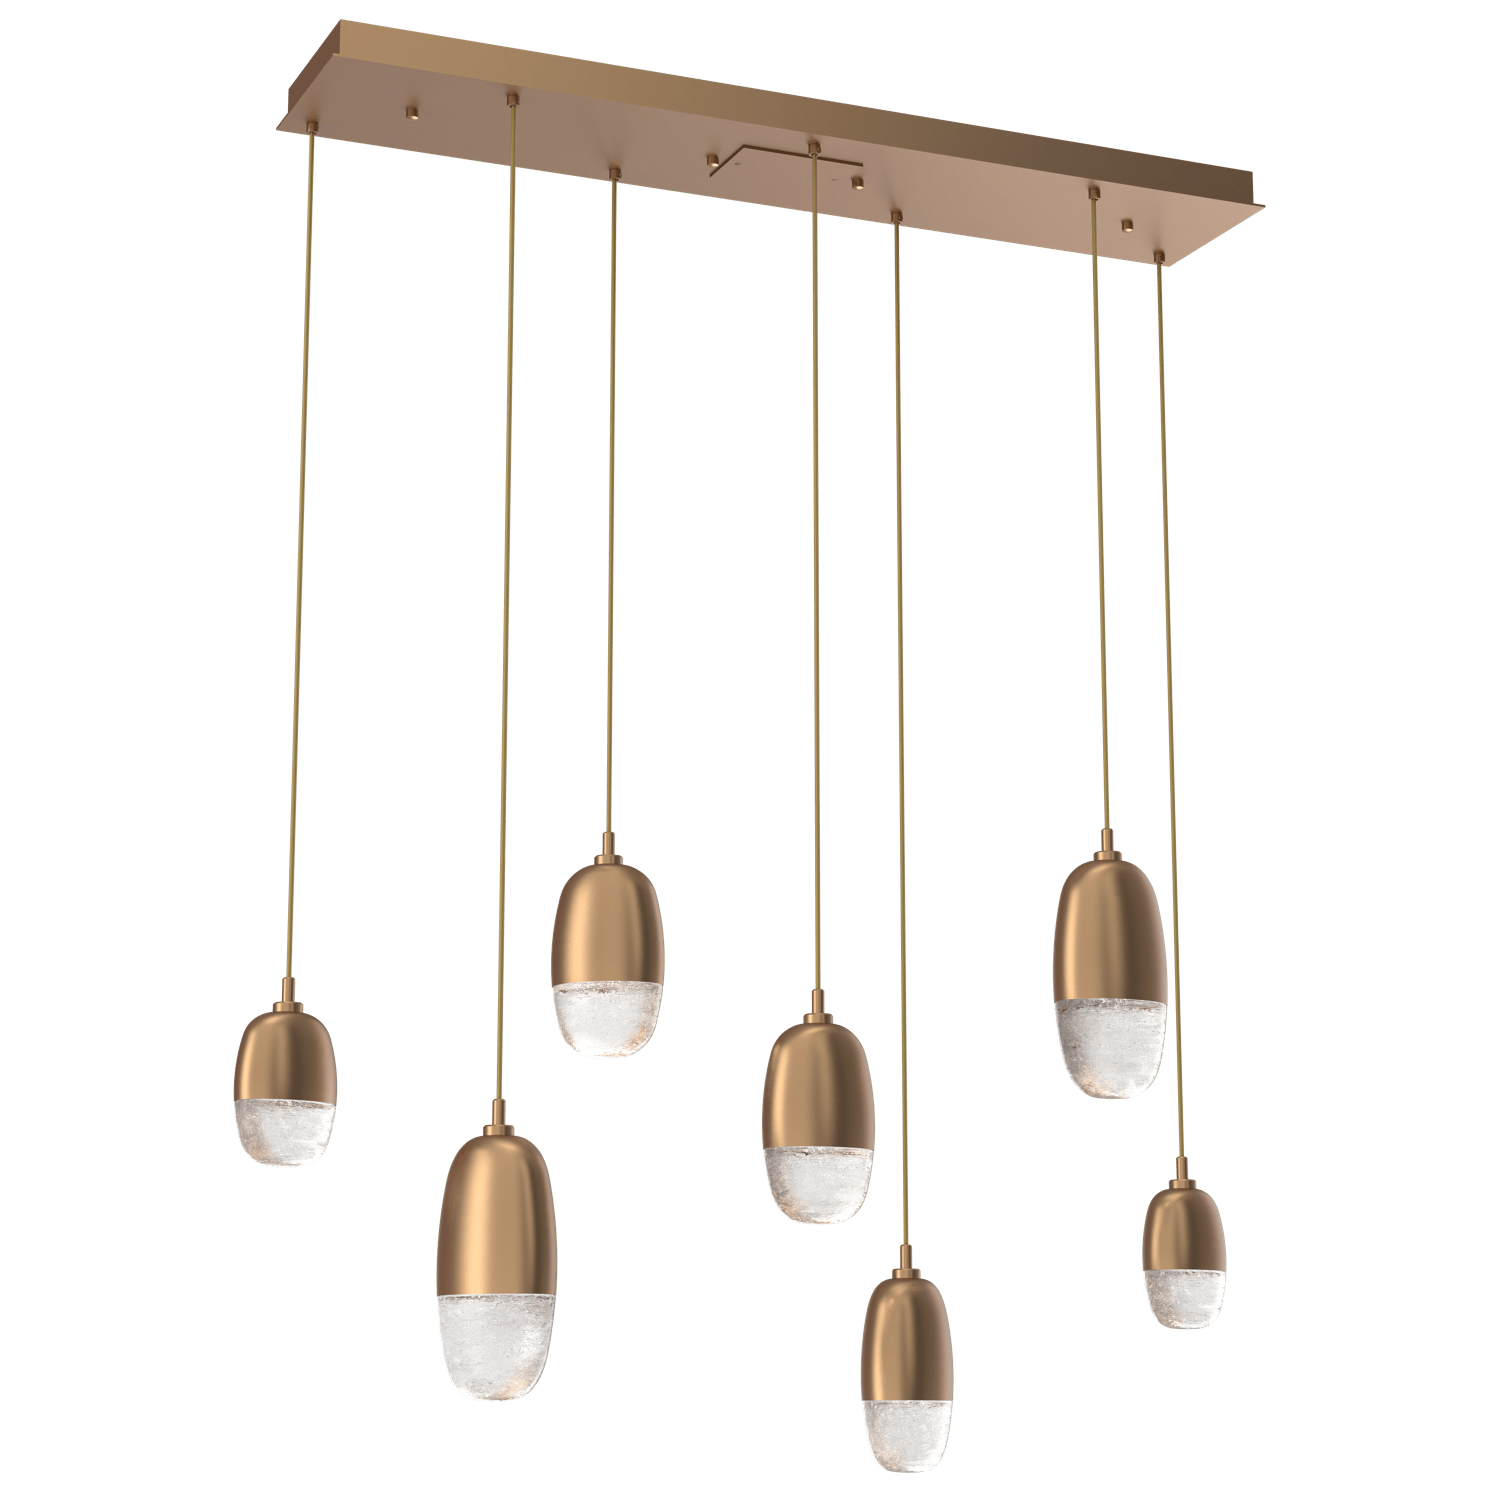 PLB0079-07-NB-Hammerton-Studio-Pebble-7-light-linear-pendant-chandelier-with-novel-brass-finish-and-clear-cast-glass-shades-and-LED-lamping